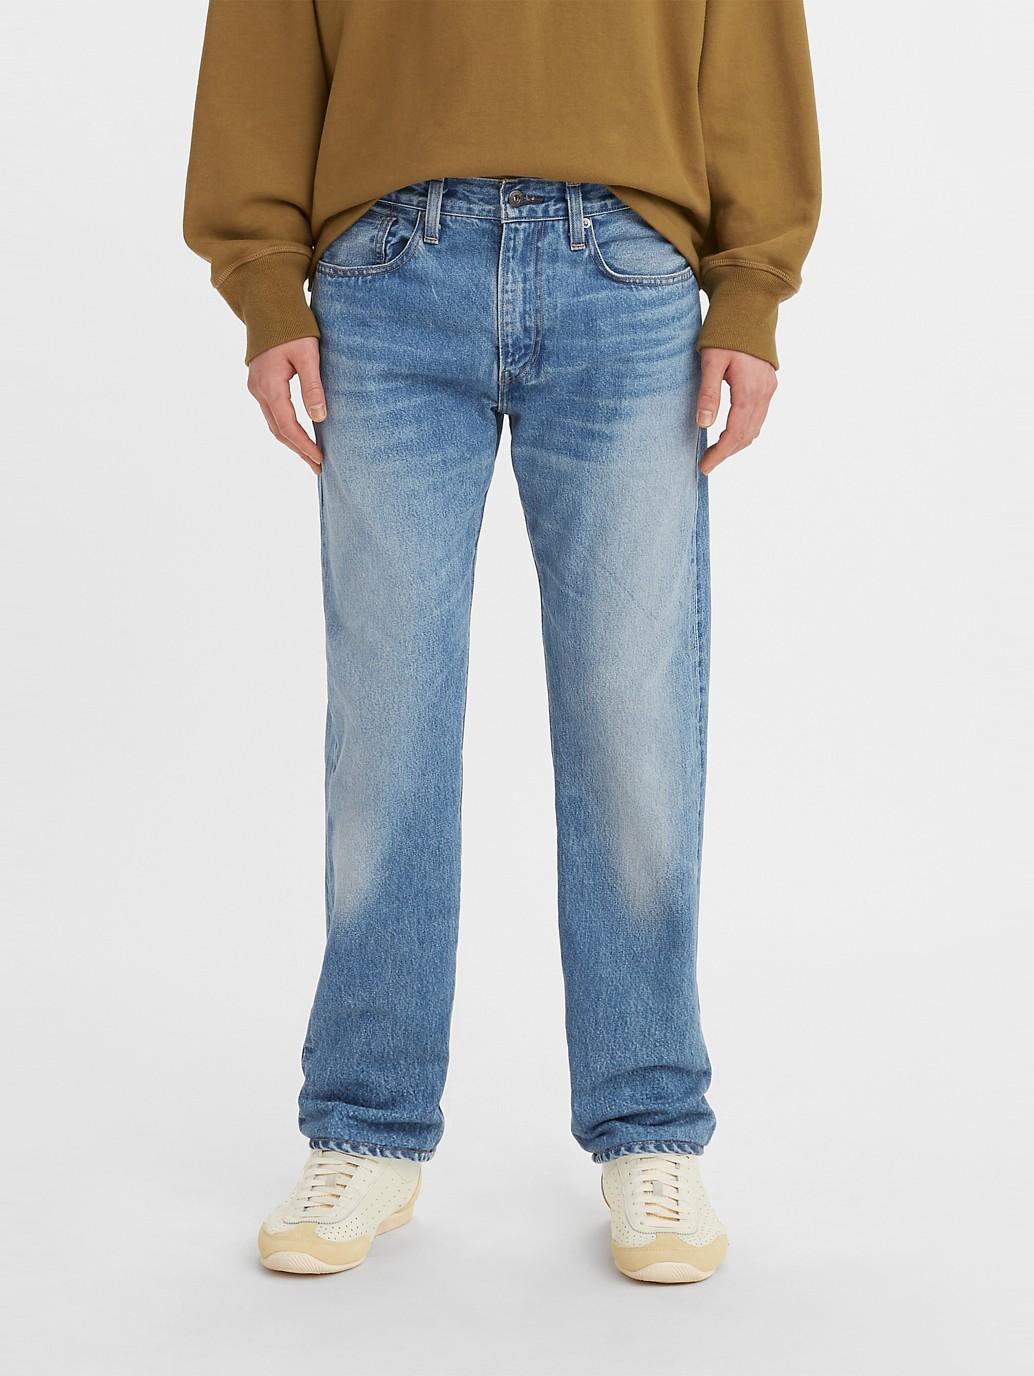 Buy Levi's® Made & Crafted® Men's 502™ Taper Jeans | Levi’s® Official ...